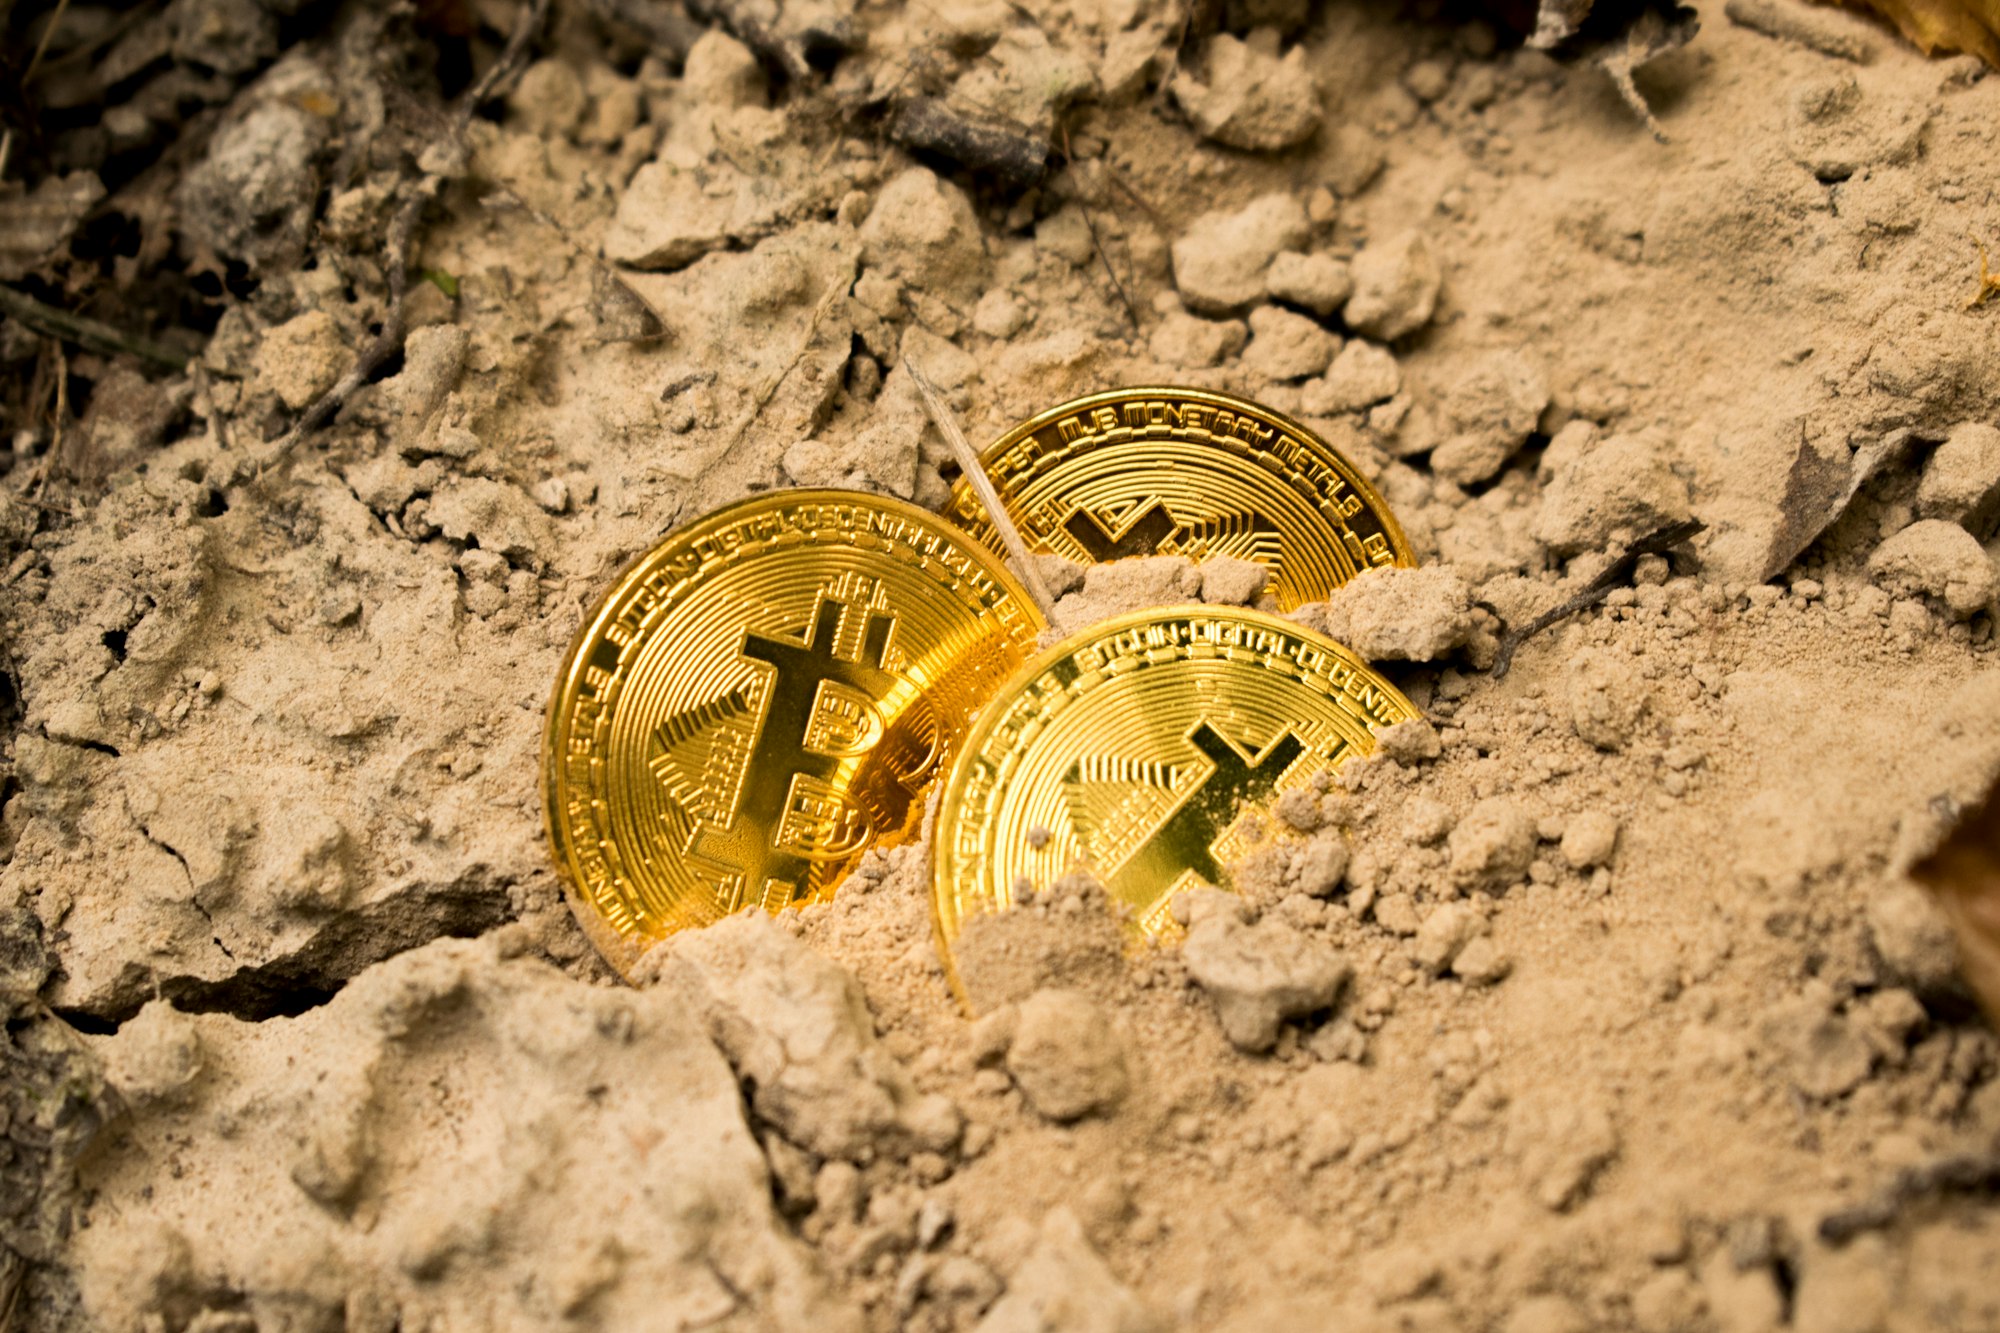 Is Bitcoin digital gold? Why Bitcoin is said to be more like gold than currency